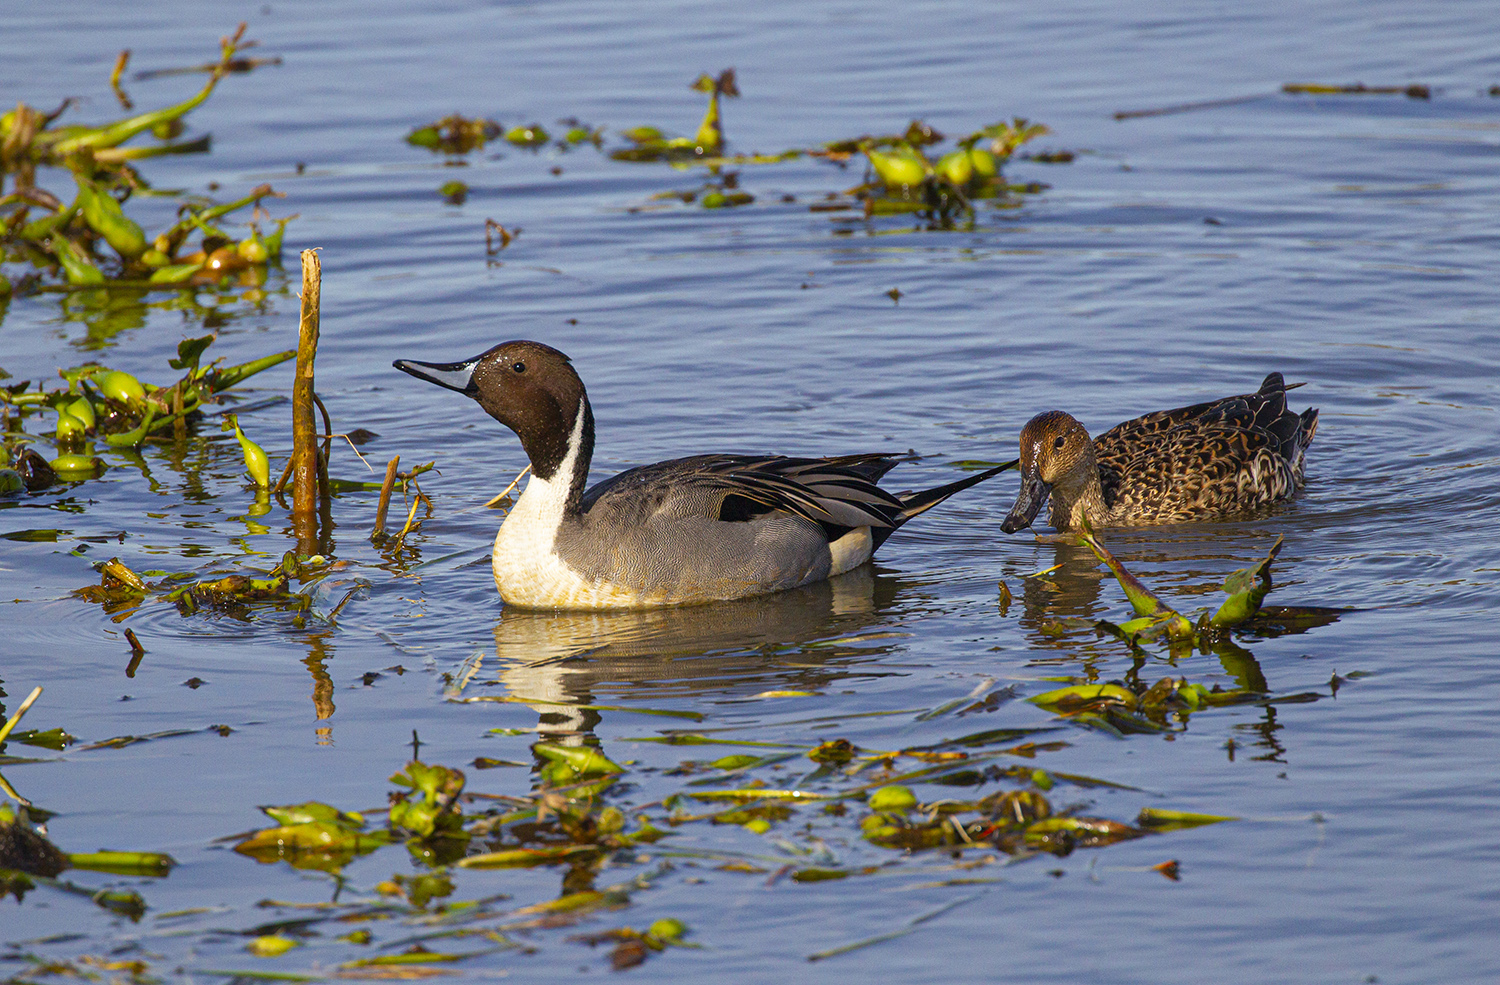 Diving ducks in distress may need our help this winter